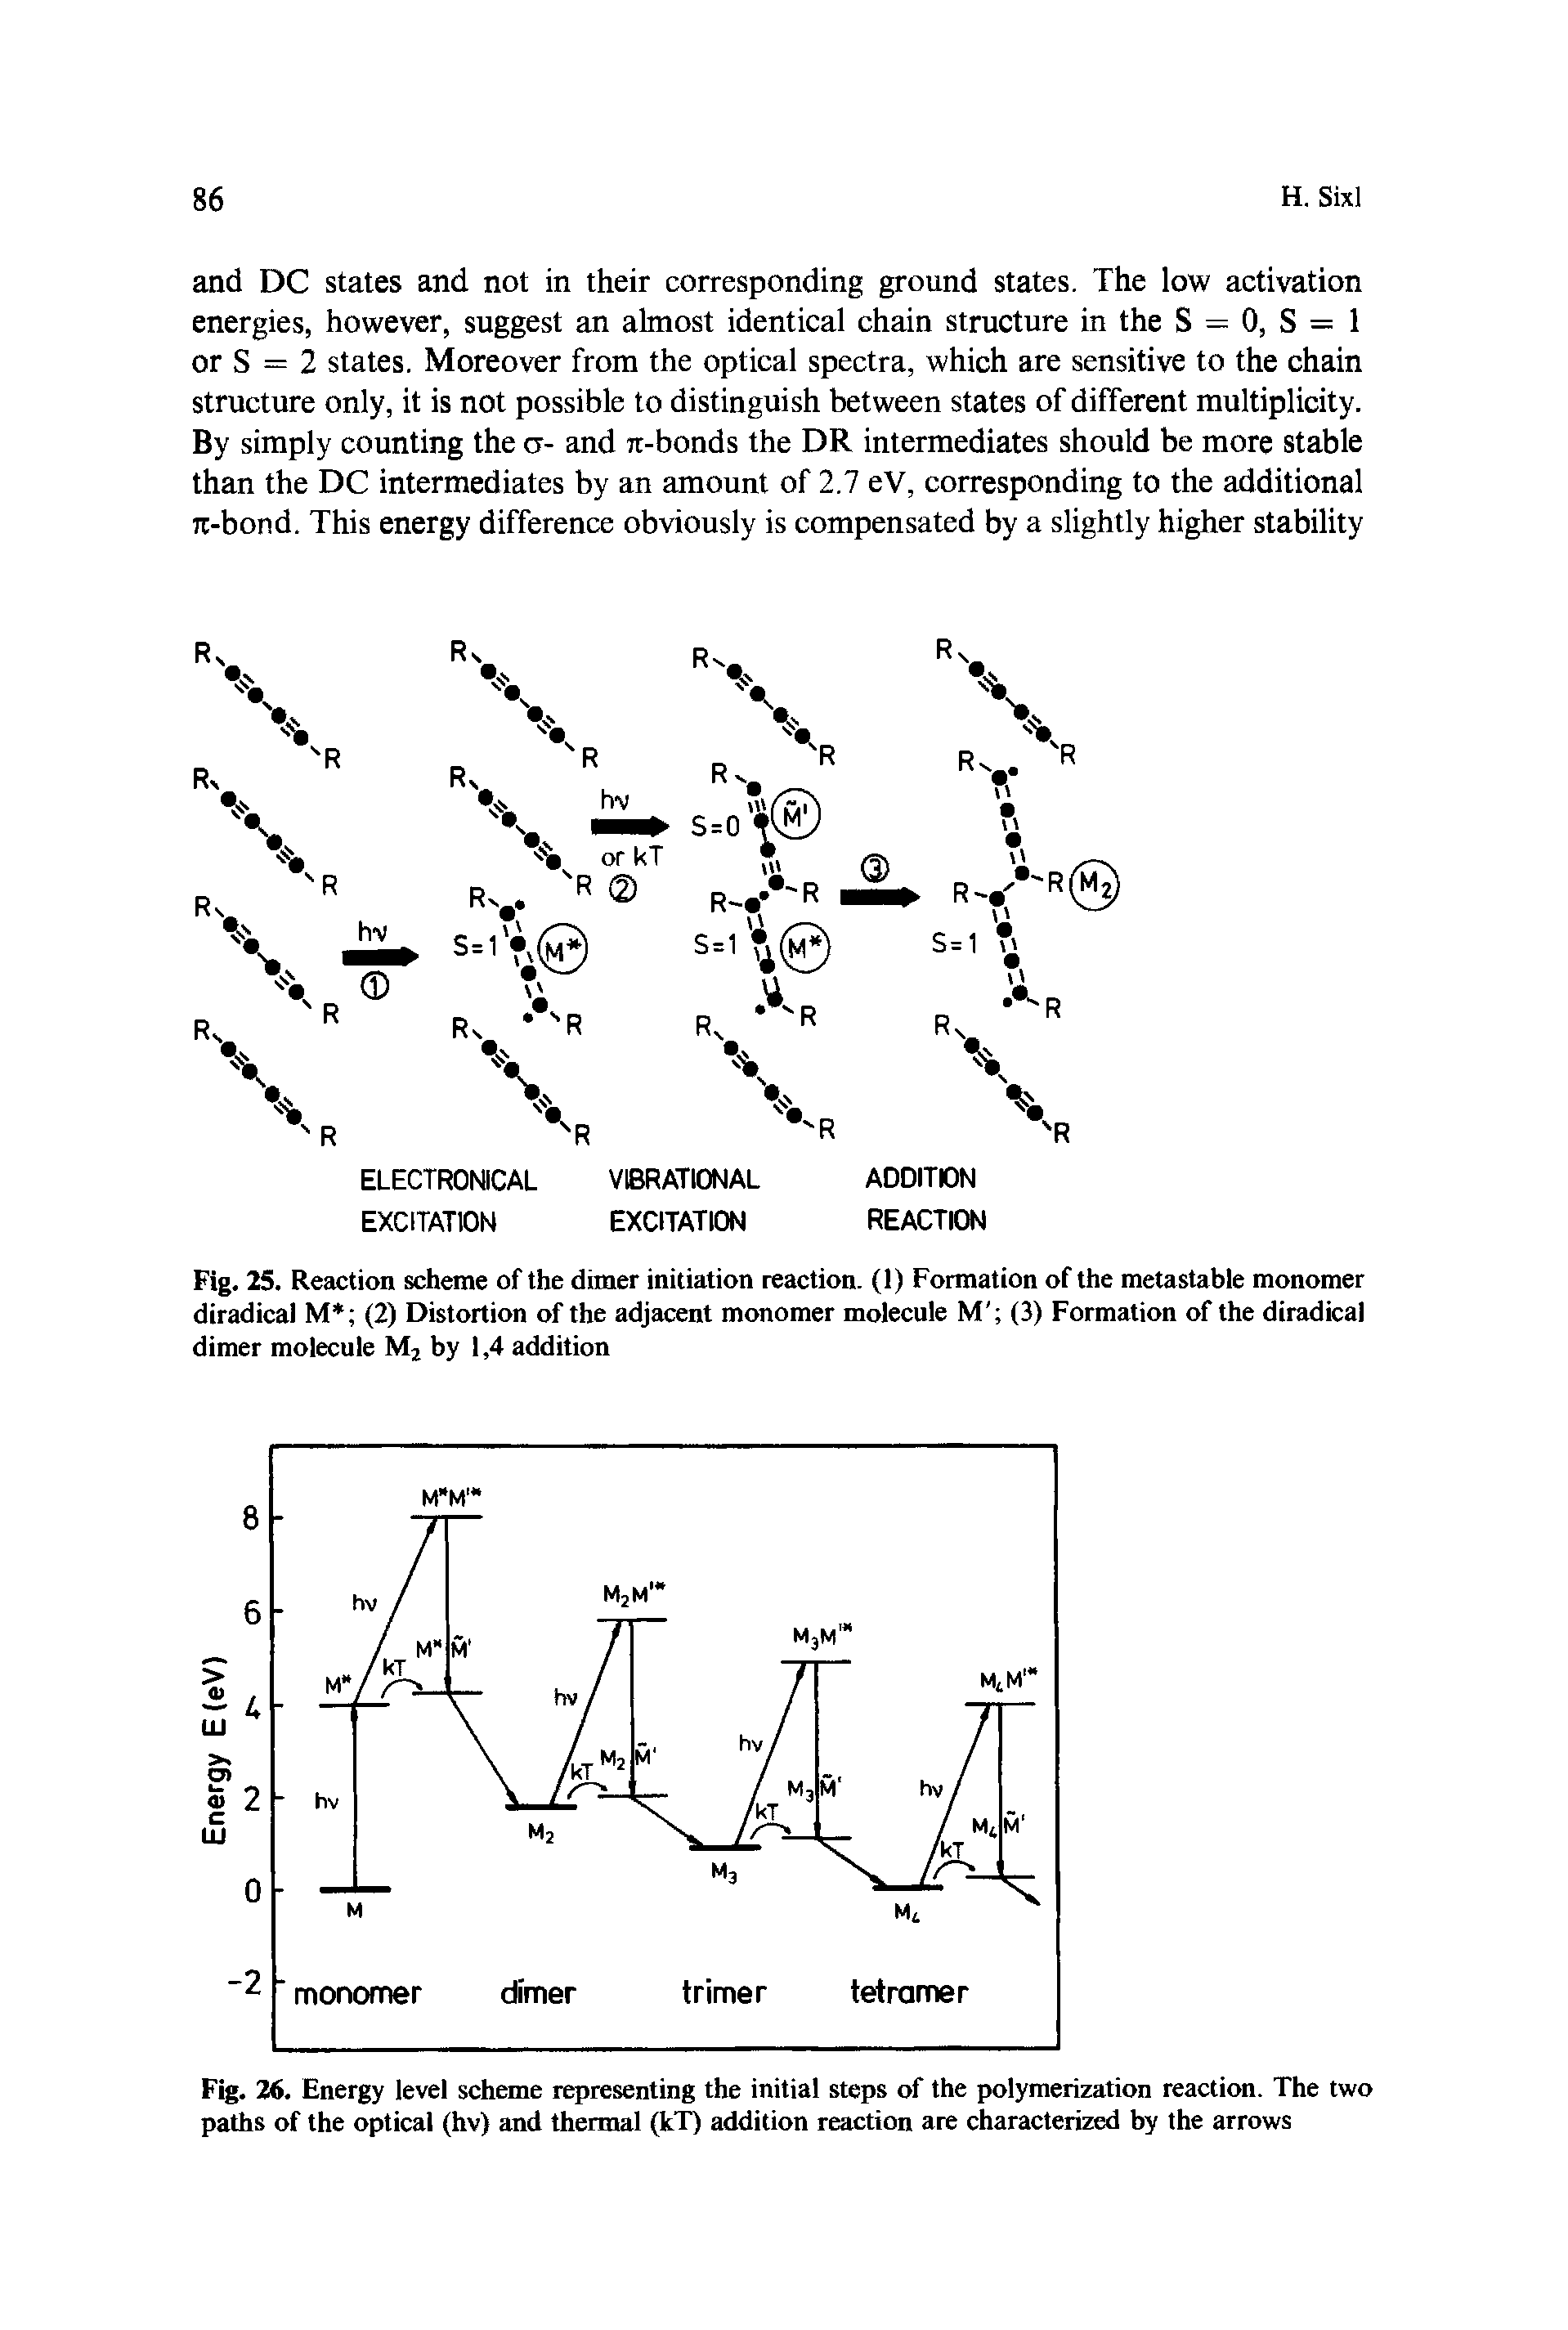 Fig. 26. Energy level scheme representing the initial steps of the polymerization reaction. The two paths of the optical (hv) and thermal (kT) addition reaction are characterized by the arrows...